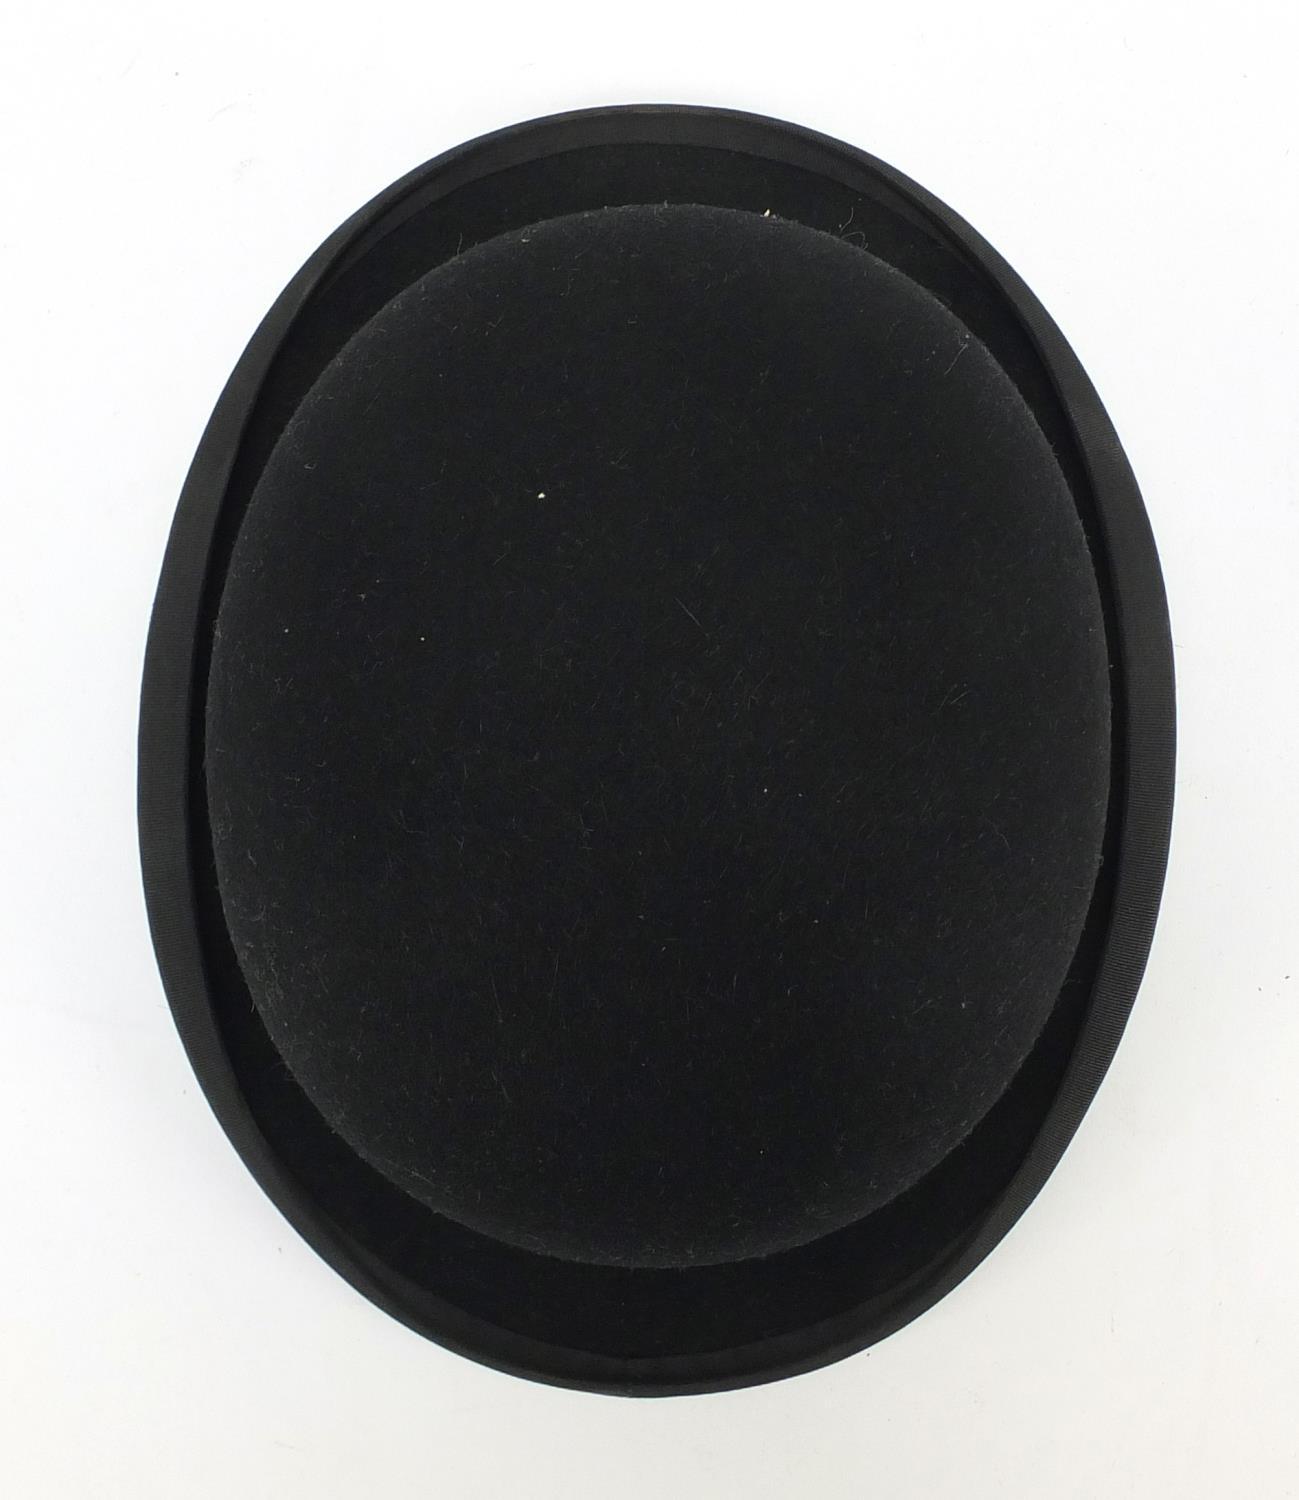 Gentleman's bowler hat retailed by Lock and Co, London, with box, the interior measurements, 21cm - Image 6 of 8